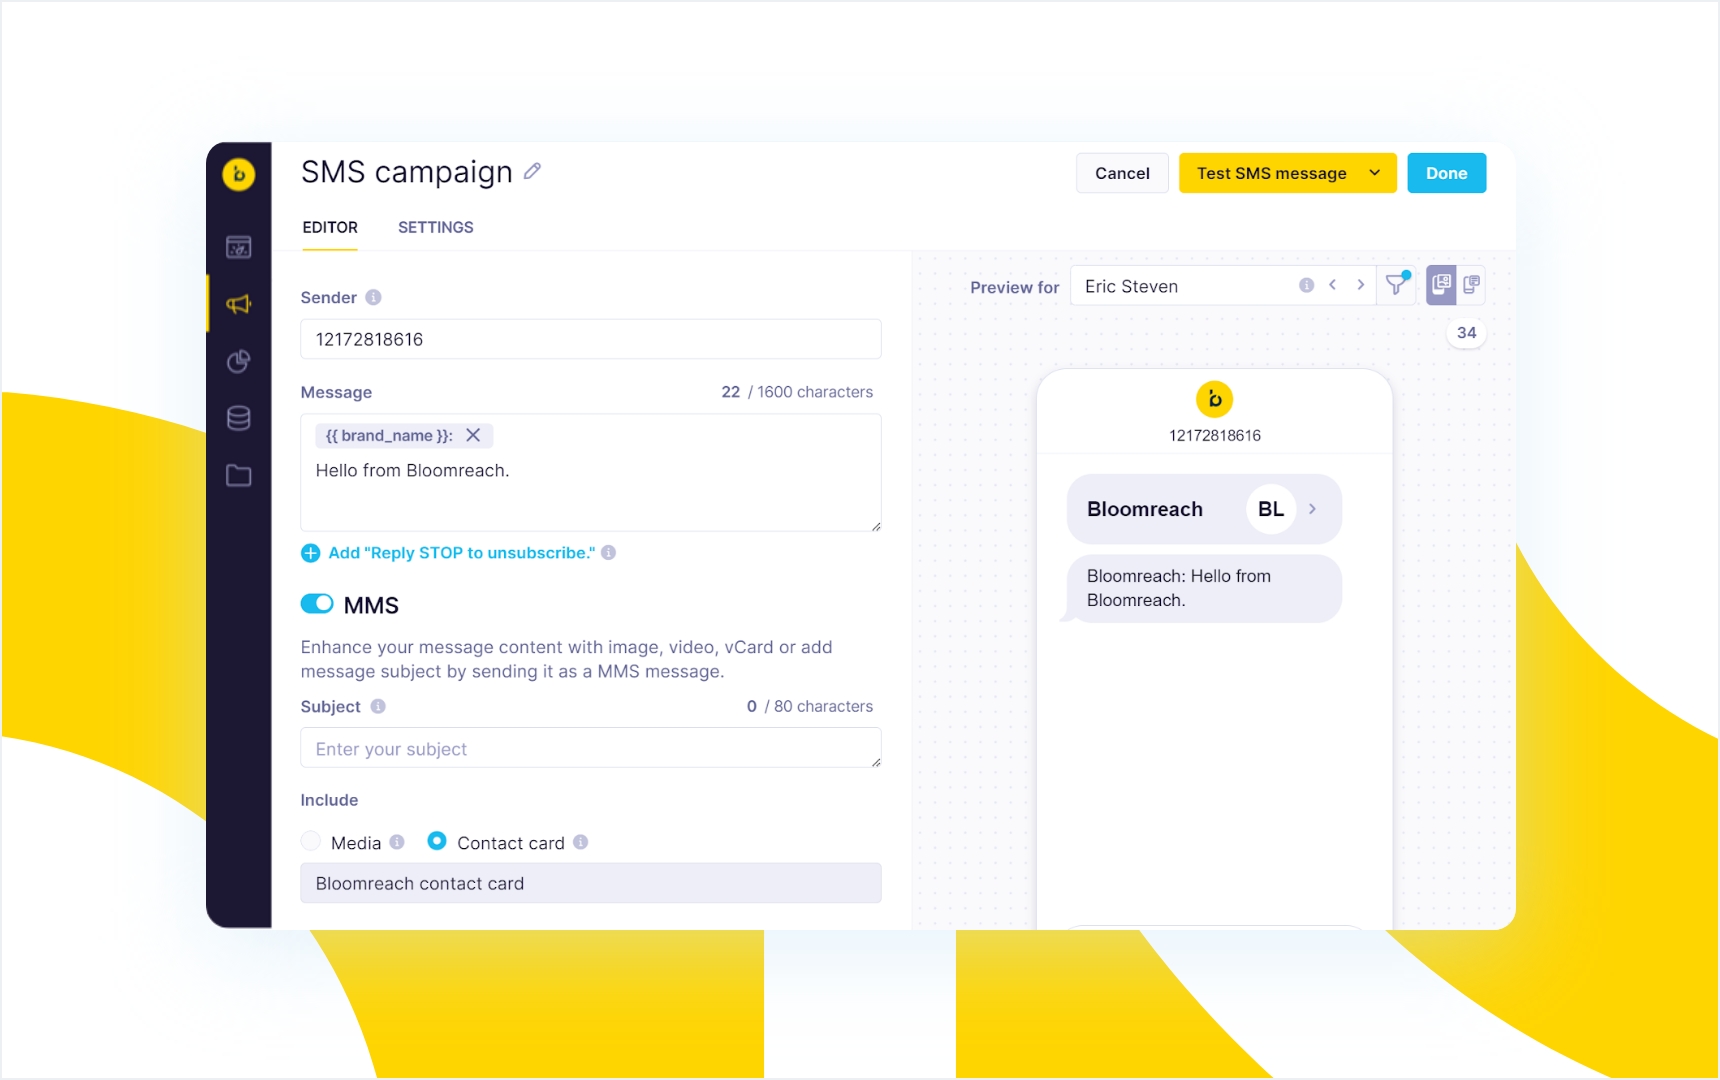 Bloomreach Engagement’s in-platform contact card creator to easily share SMS contact cards